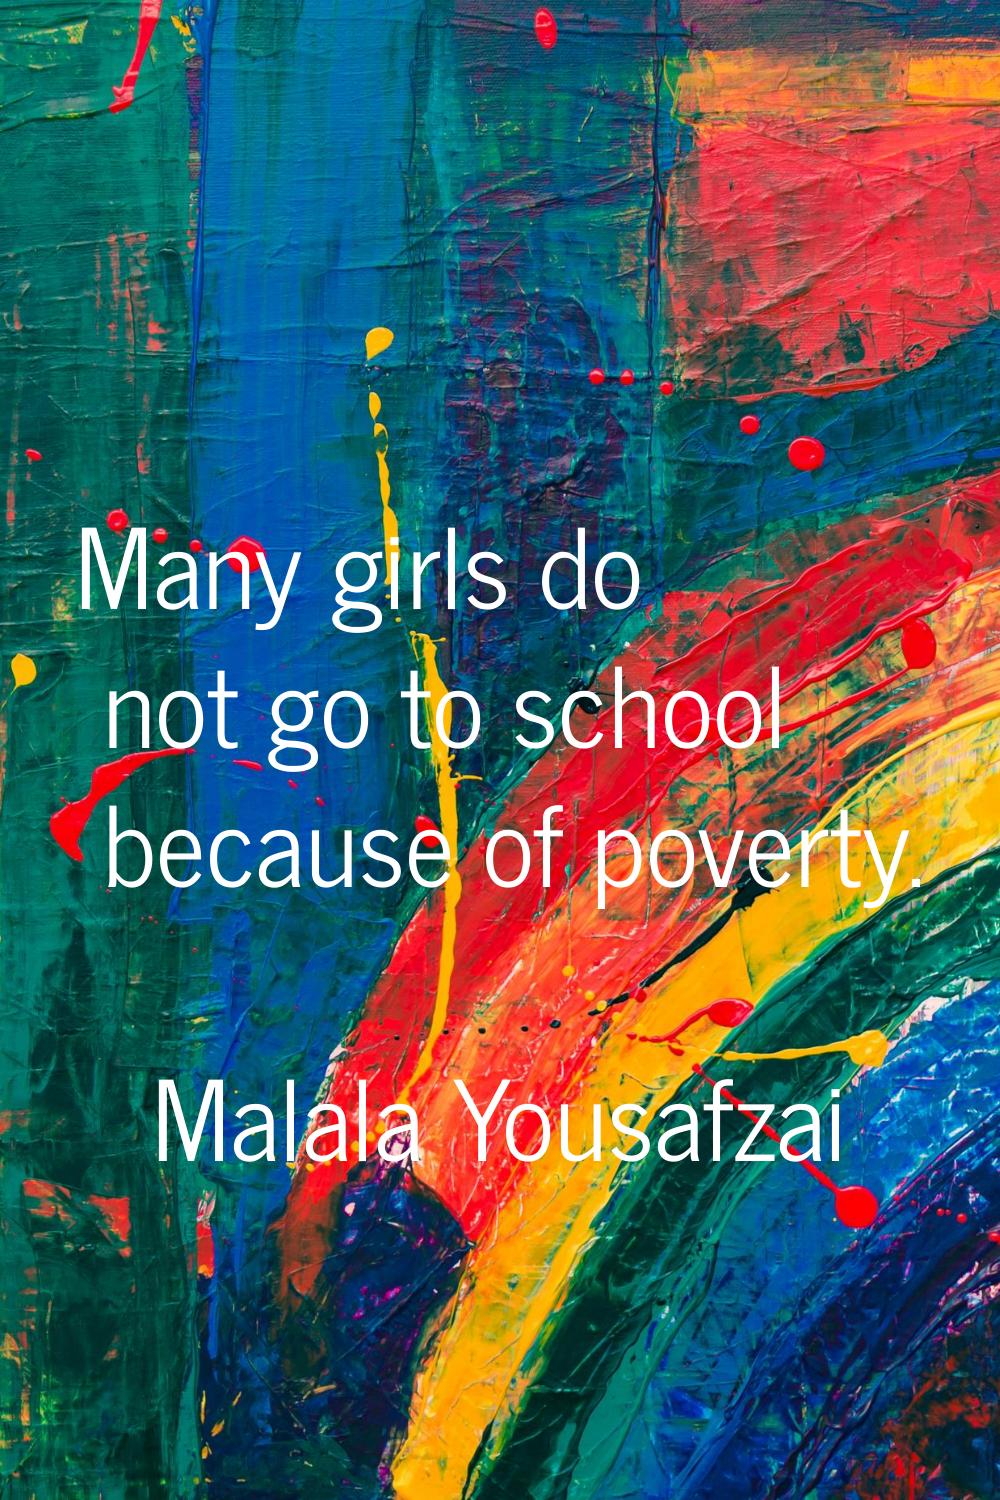 Many girls do not go to school because of poverty.